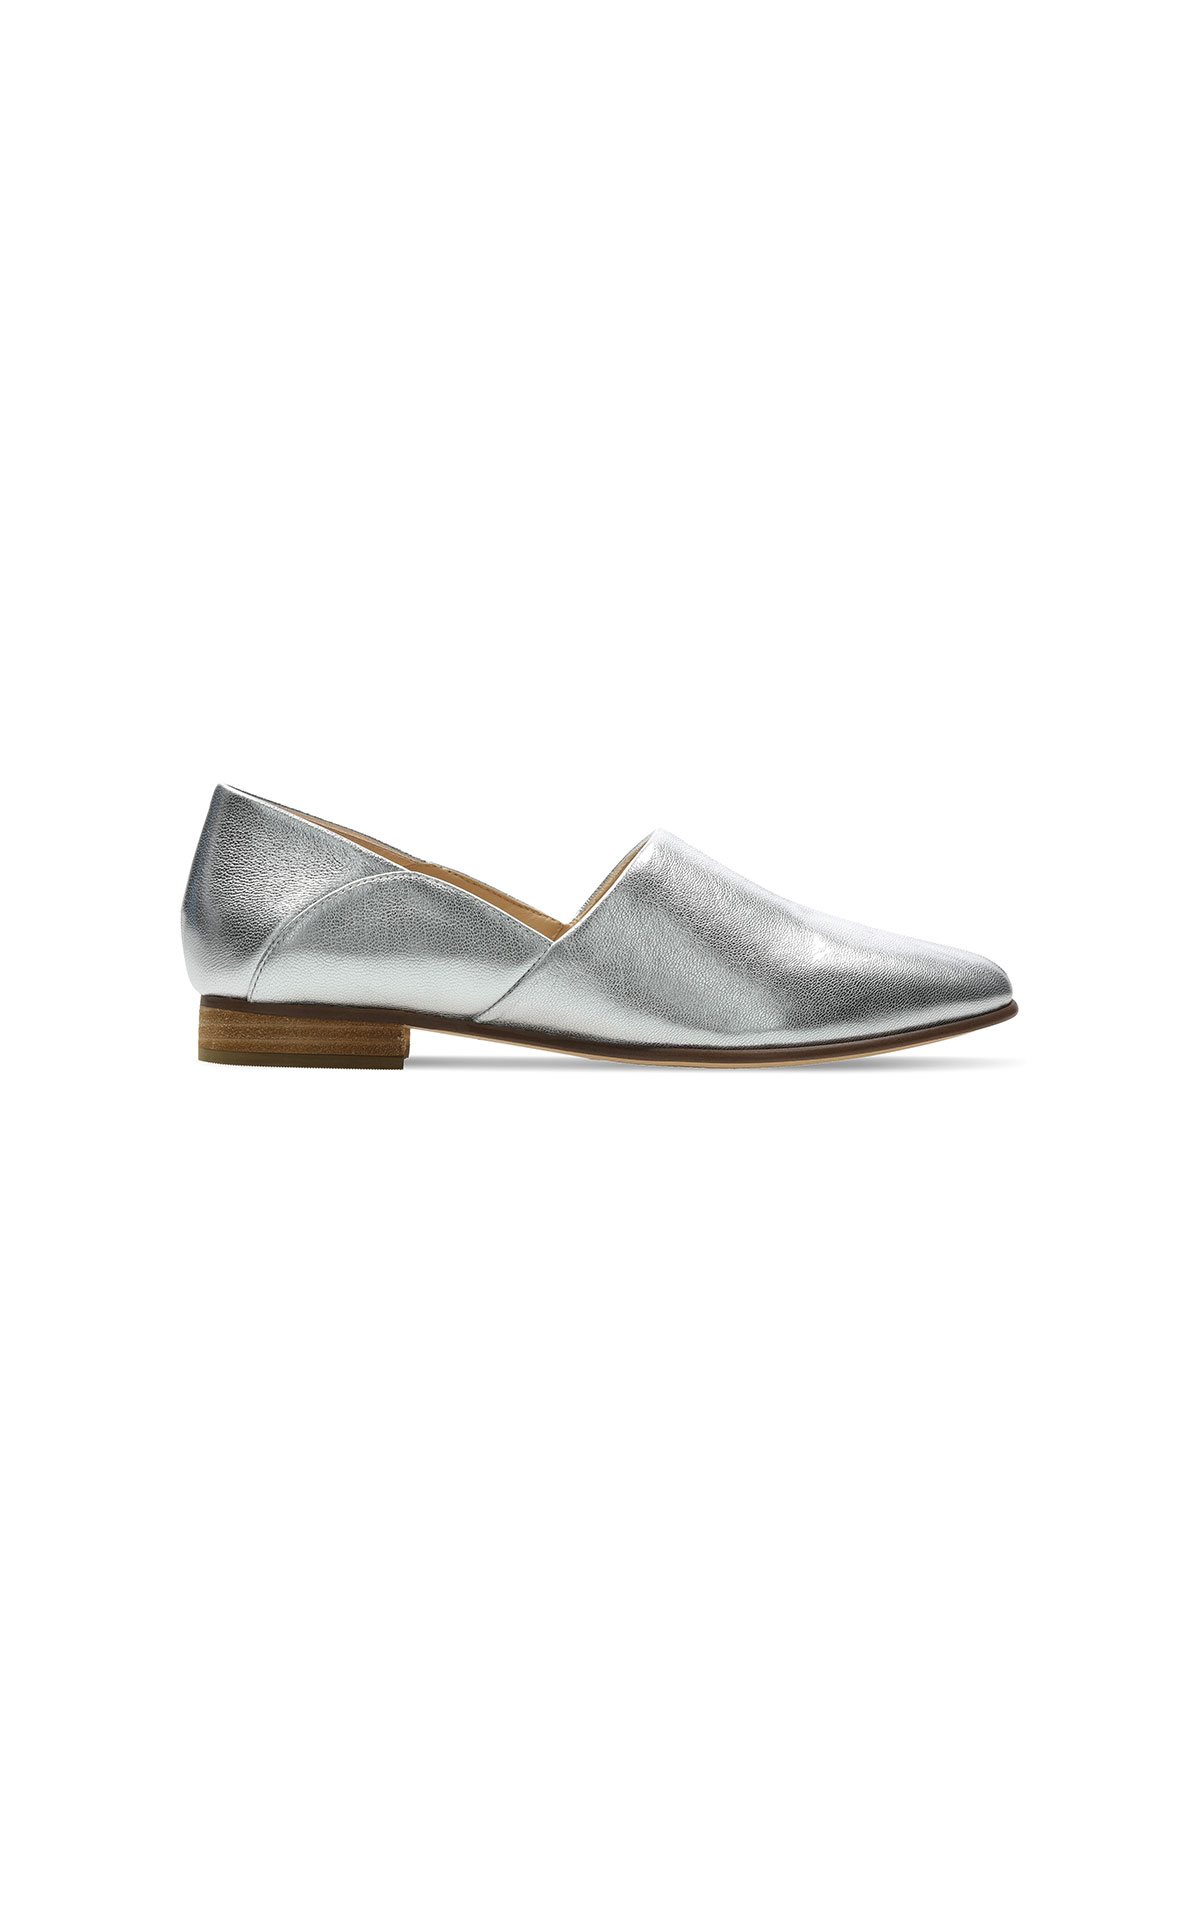 Clarks Pure tone silver from Bicester Village